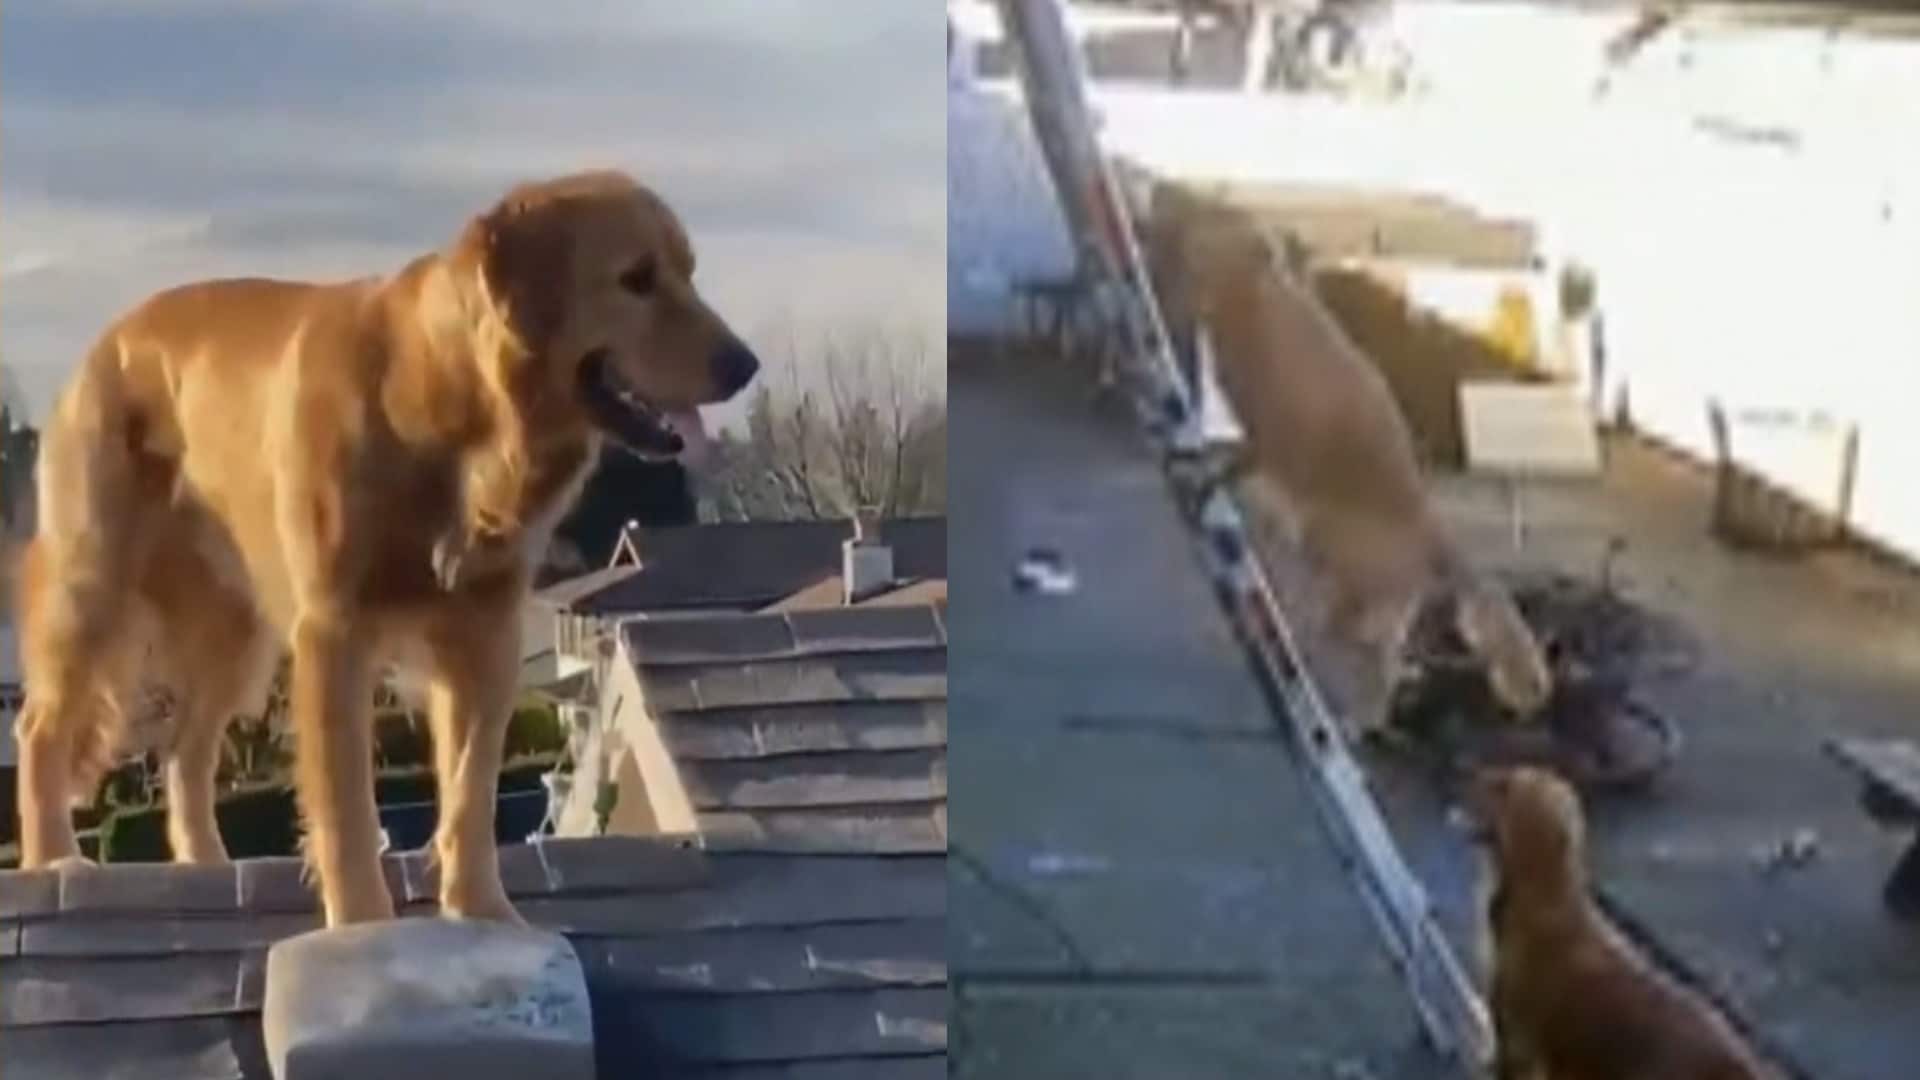 CTV Your Morning | Dog surprises owner by climbing ladder to rooftop